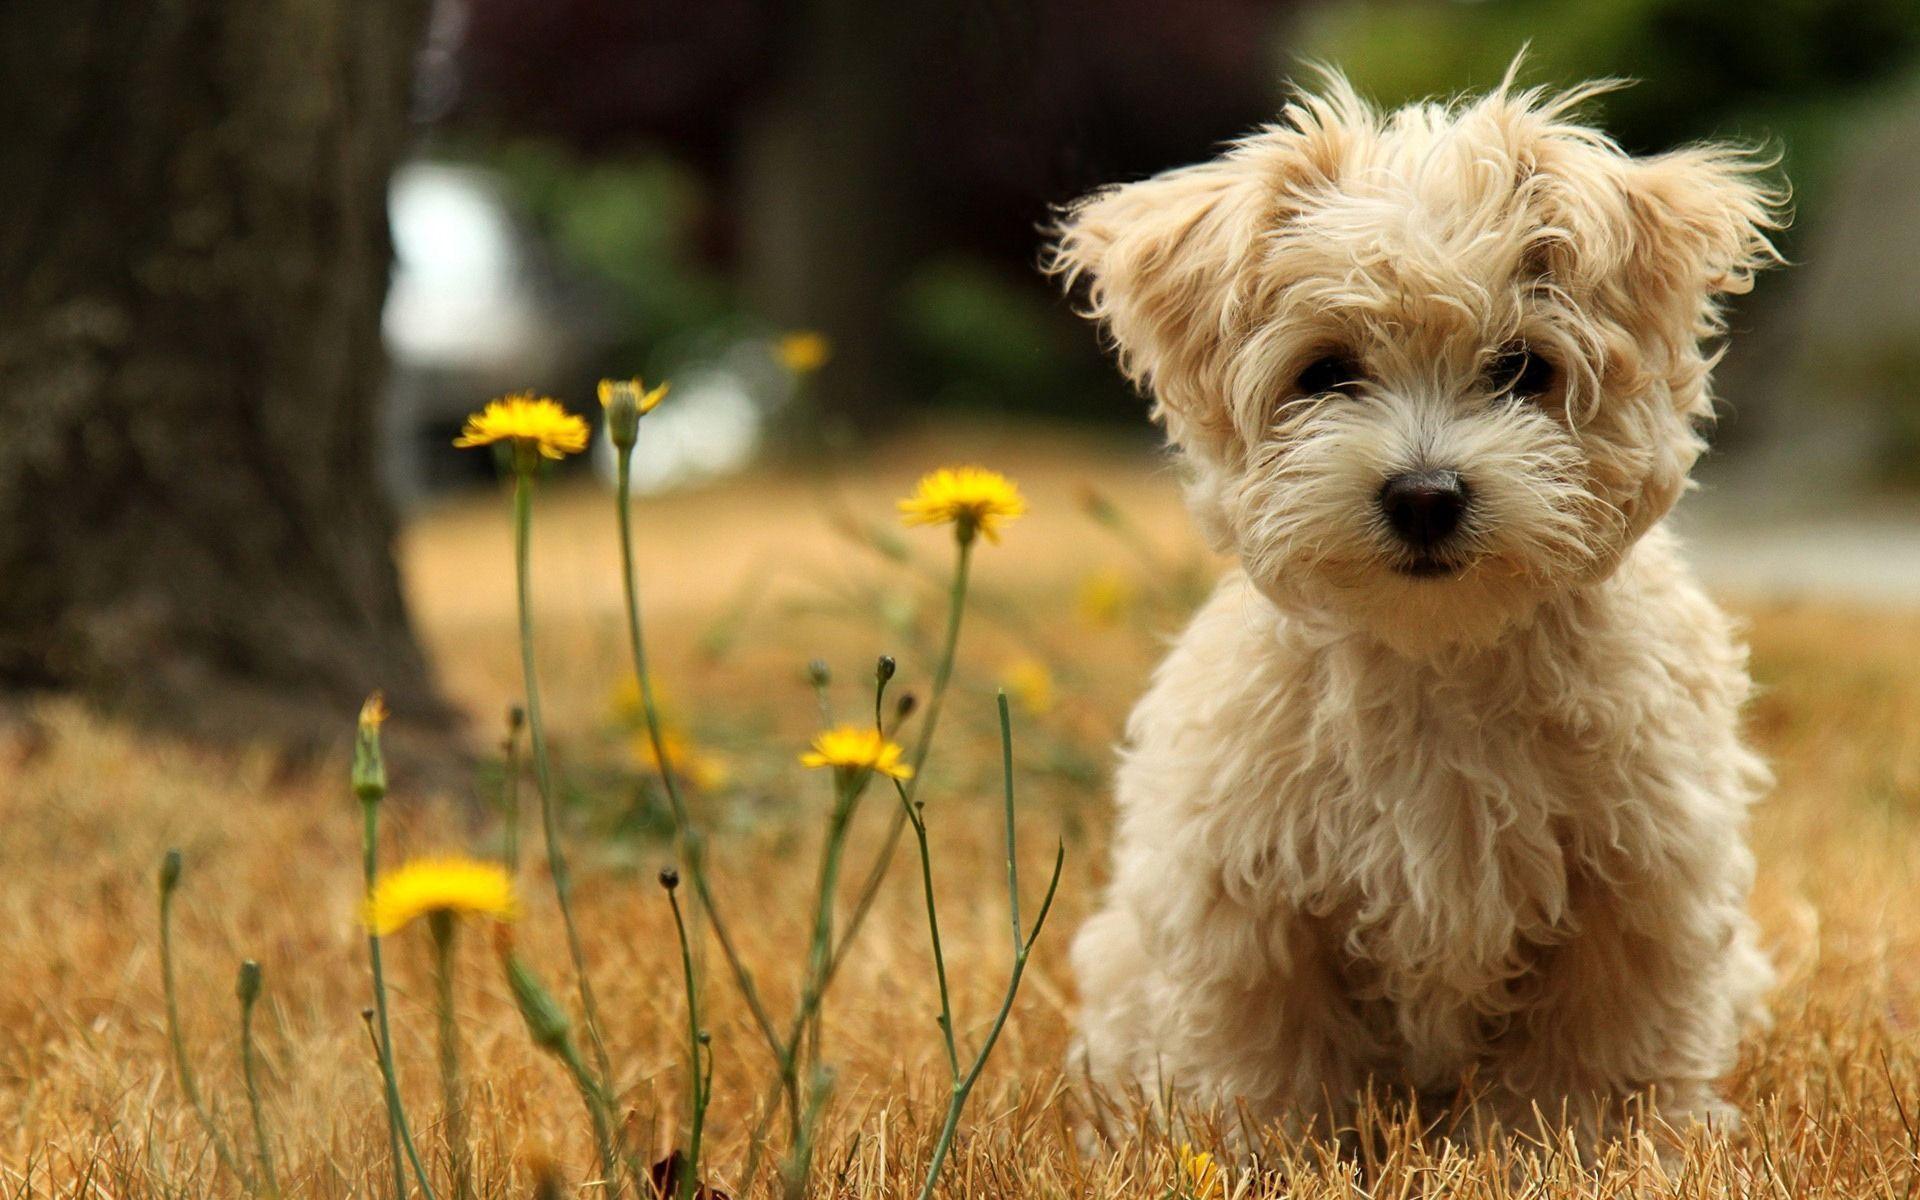 Cute Yorkie Puppies Wallpaper High Quality Download Free